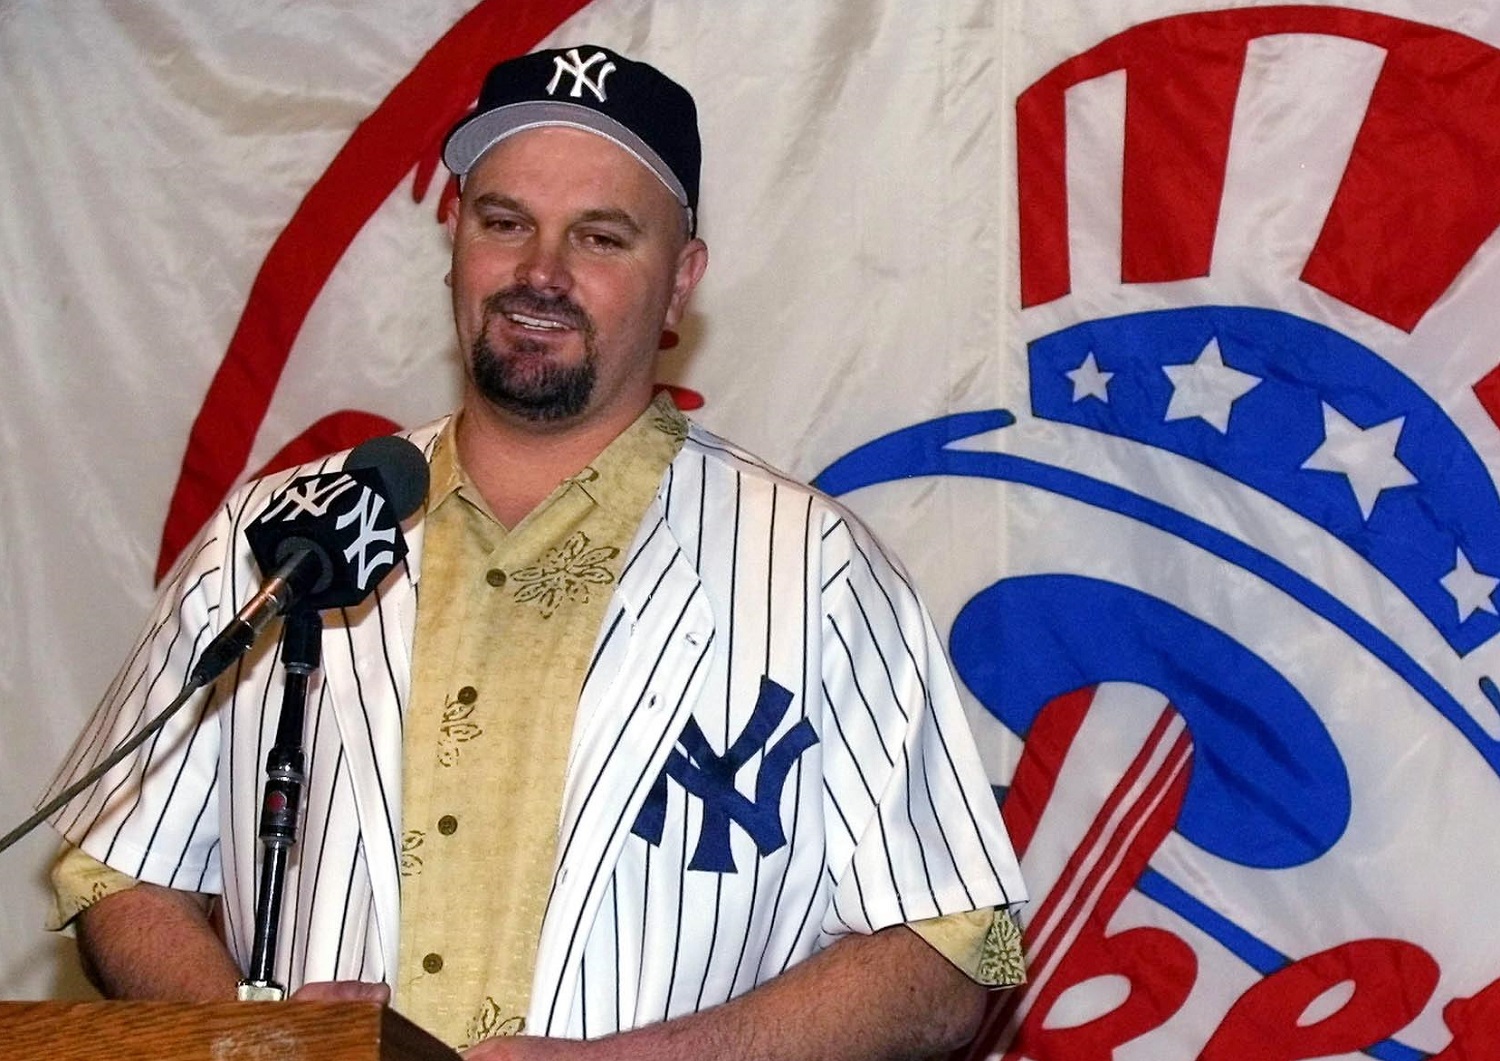 Pitcher David Wells answers questions at a press conference announcing his signing for the second time with the New York Yankees on Jan. 20, 2002.